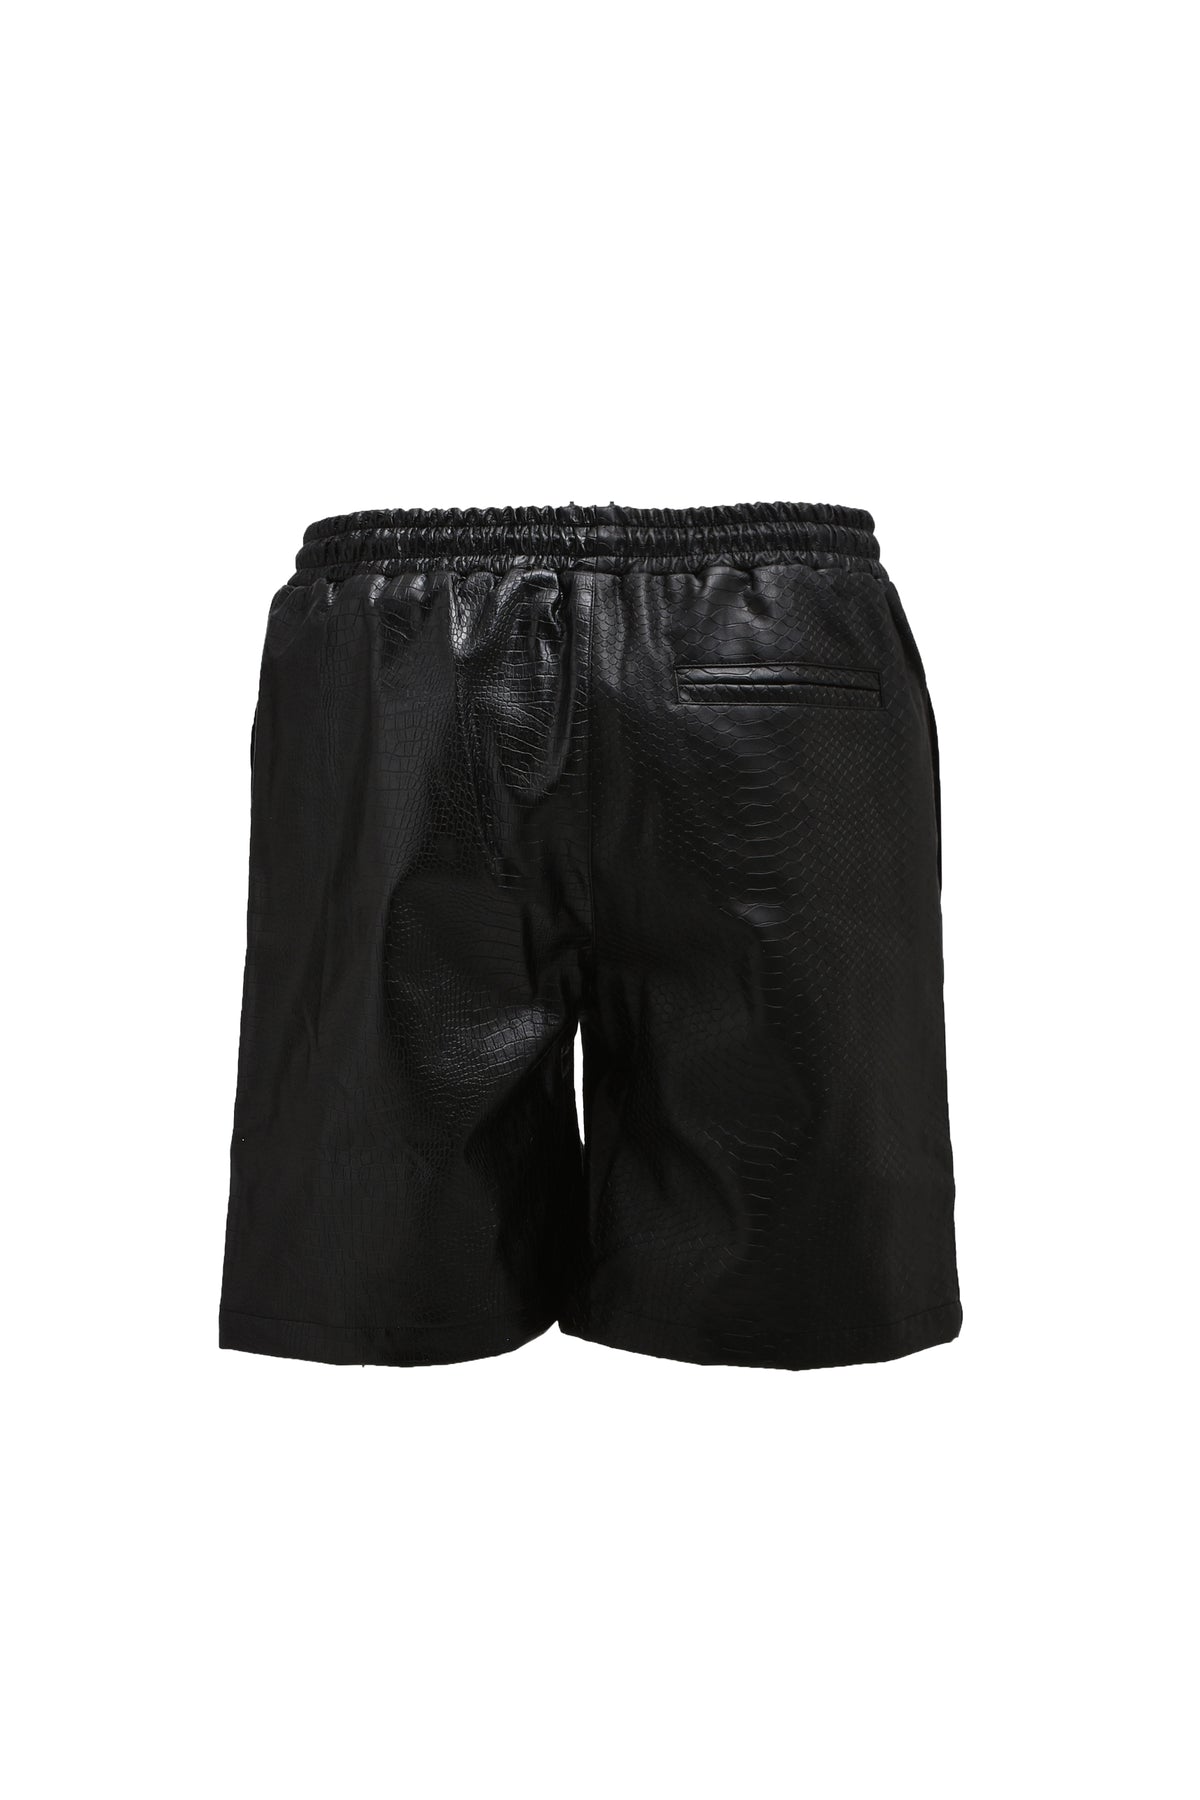 LEATHER SHORTS / BLK